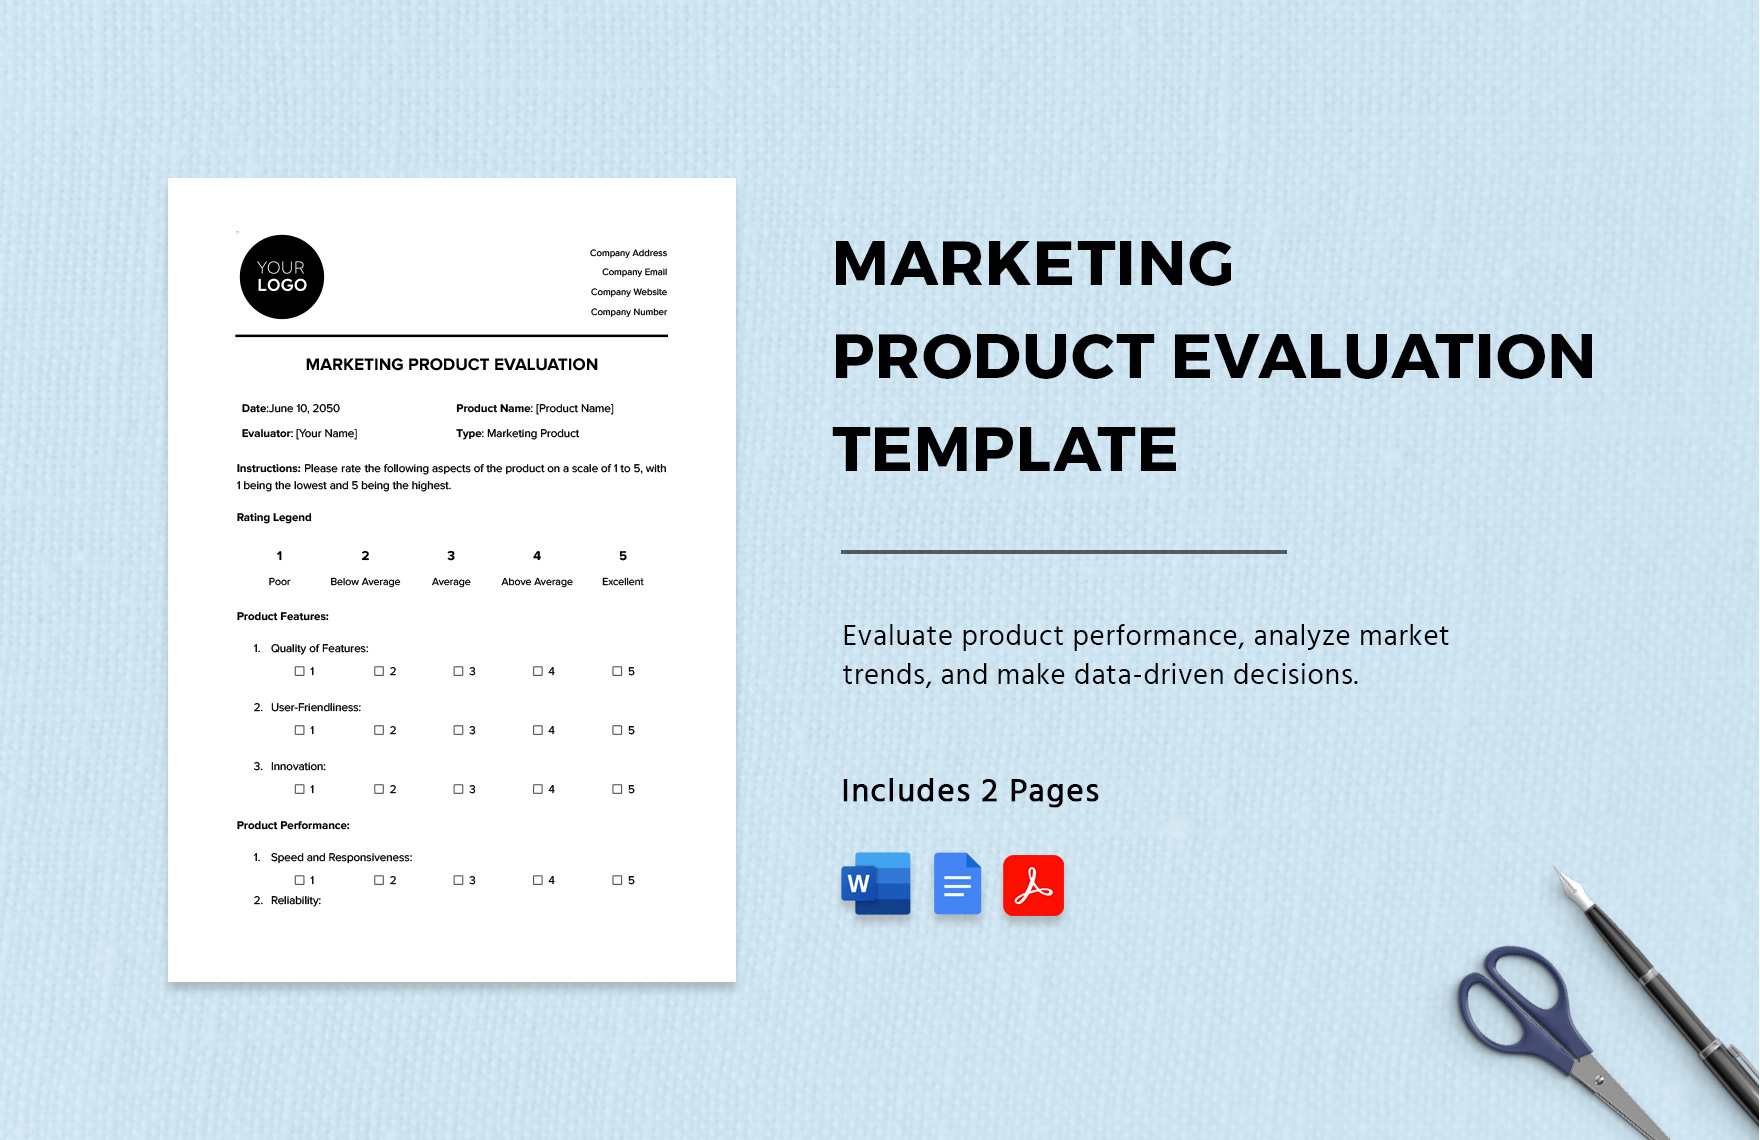 Marketing Product Evaluation Template